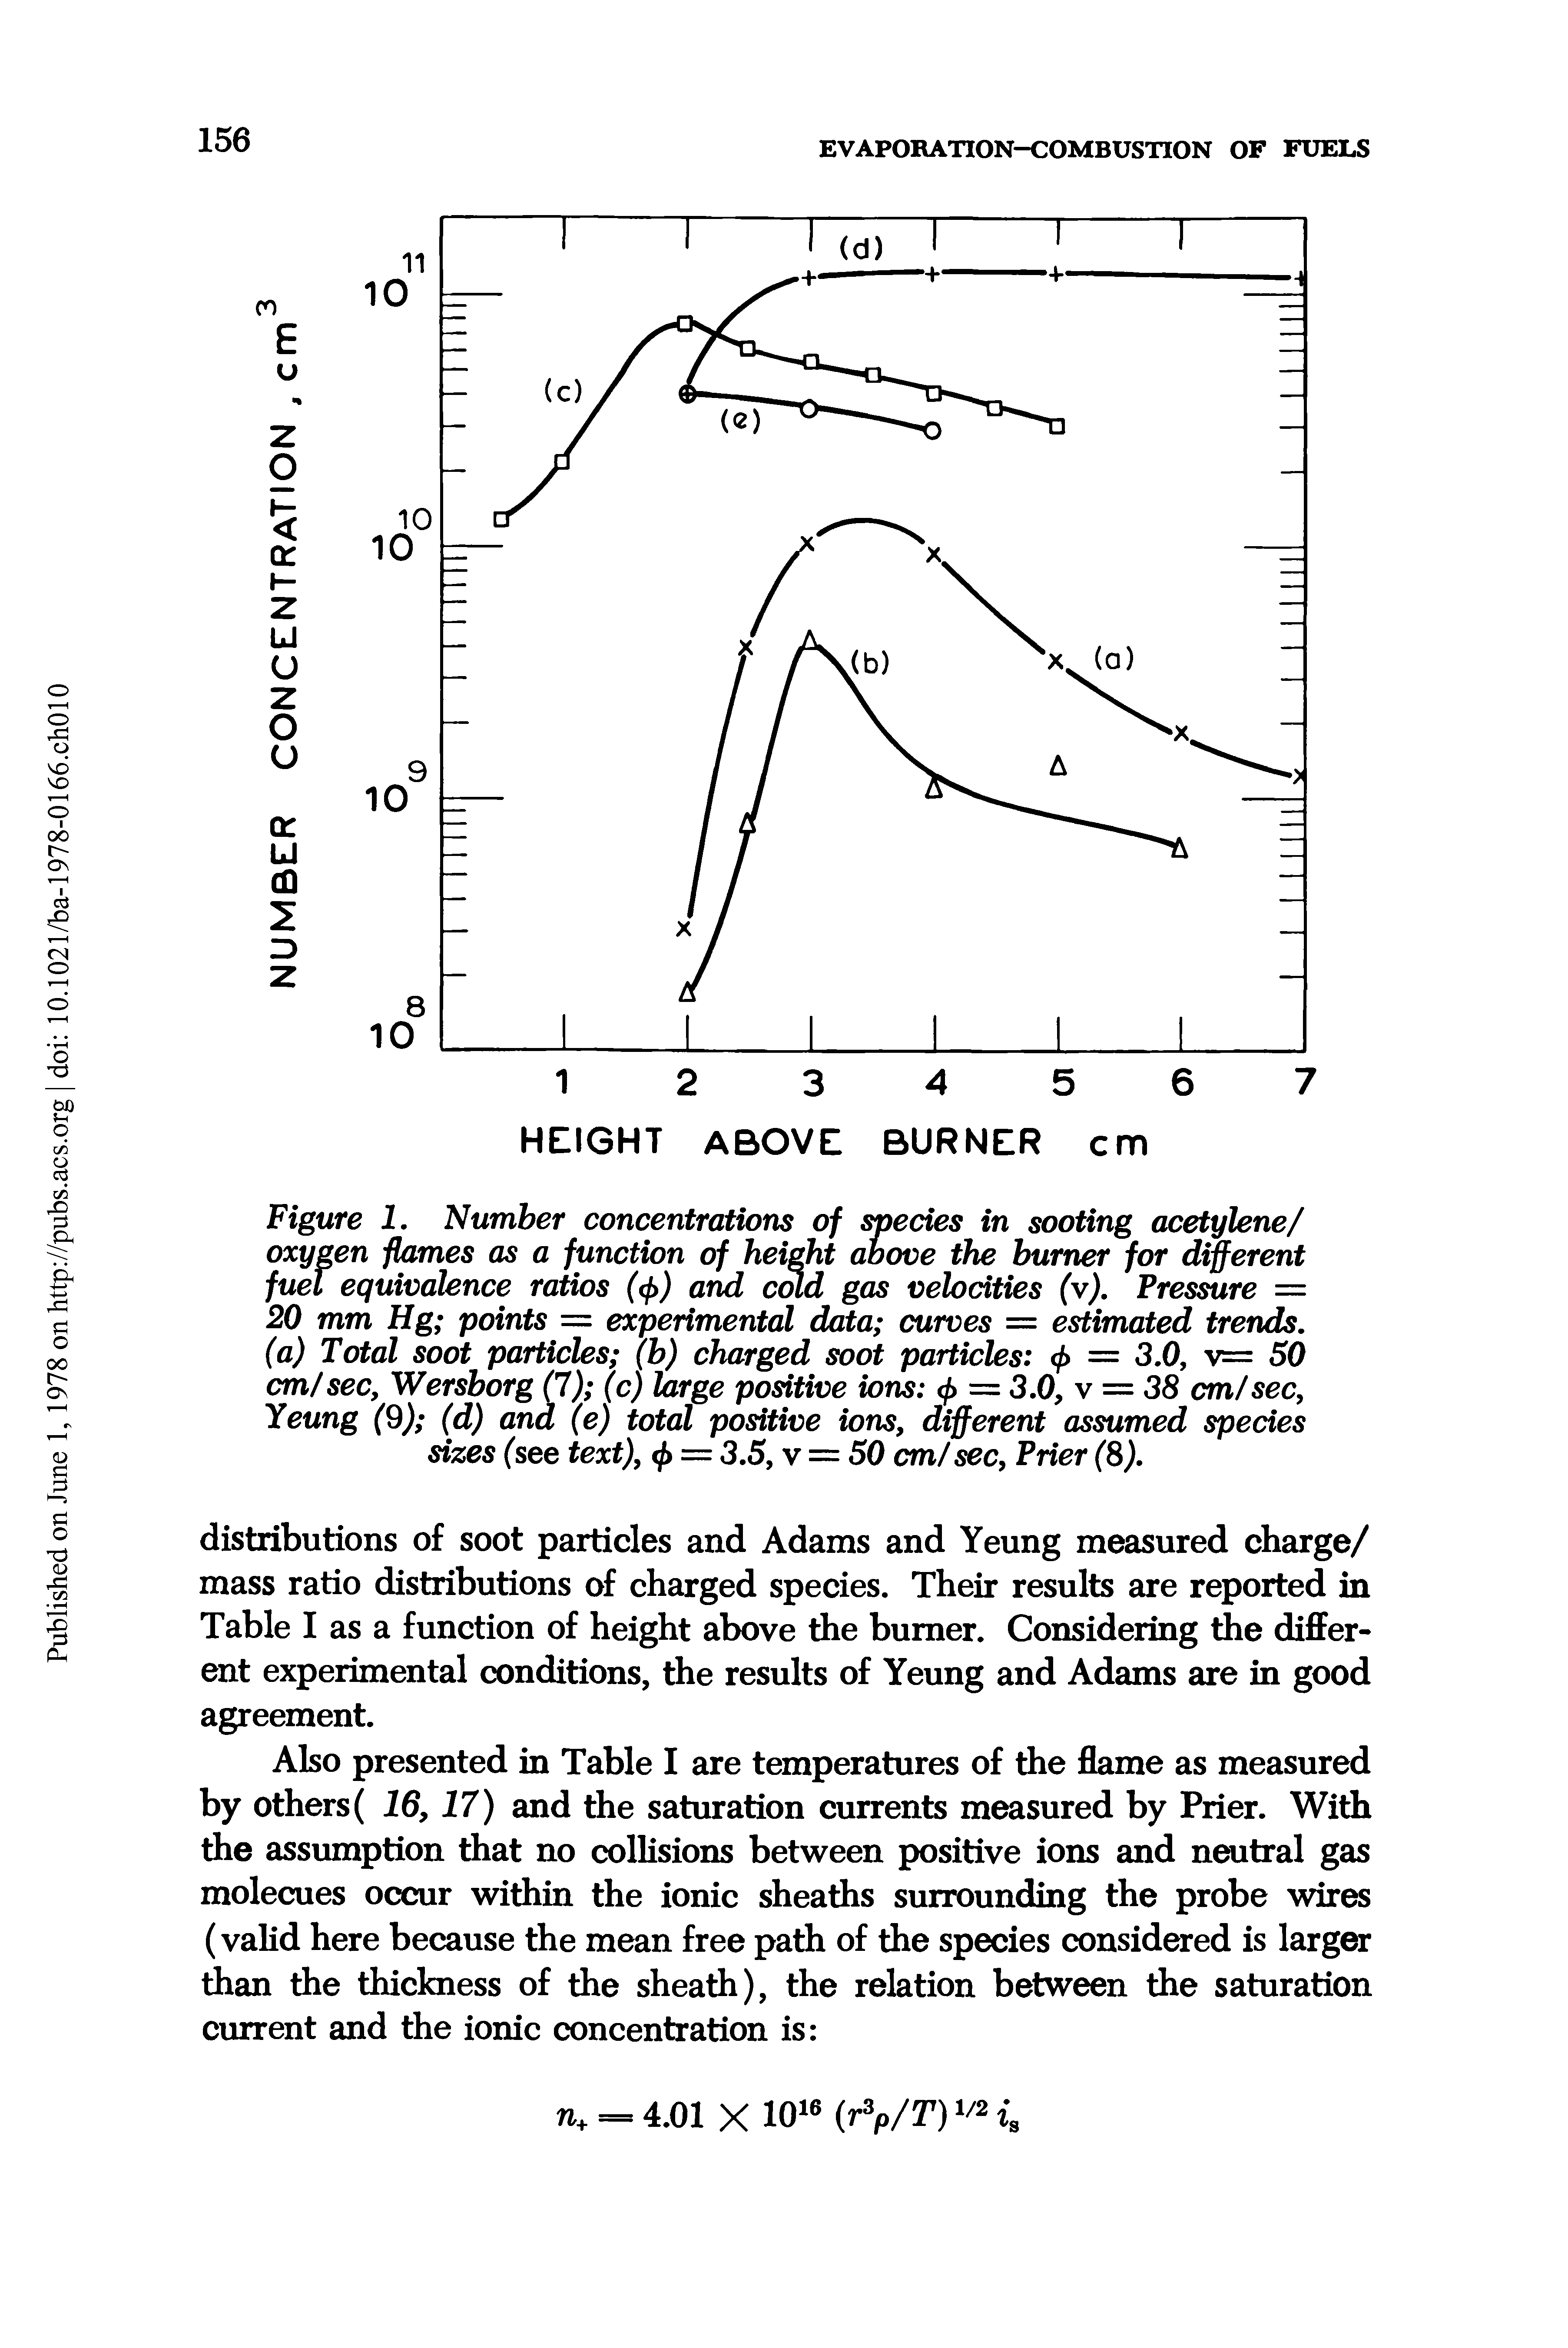 Figure 1. Number concentrations of species in sooting acetylene/ oxygen flames as a function of height above the burner for different fuel equivalence ratios (<f>) and cM gas velocities (v). Pressure = 20 mm Hg points = experimental data curves = estimated trends, (a) Total soot particles (b) charged soot particles </> = 3.0, v= 50 cmisec, Wersborg (7) (c) targe positive ions </> = 3,0, v = 38 cm sec, Yeung (9) (d) and (e) total positive ions, different assumed species sizes (see text), <j> = 3,5, v = 50 cmisec. Frier (S),...